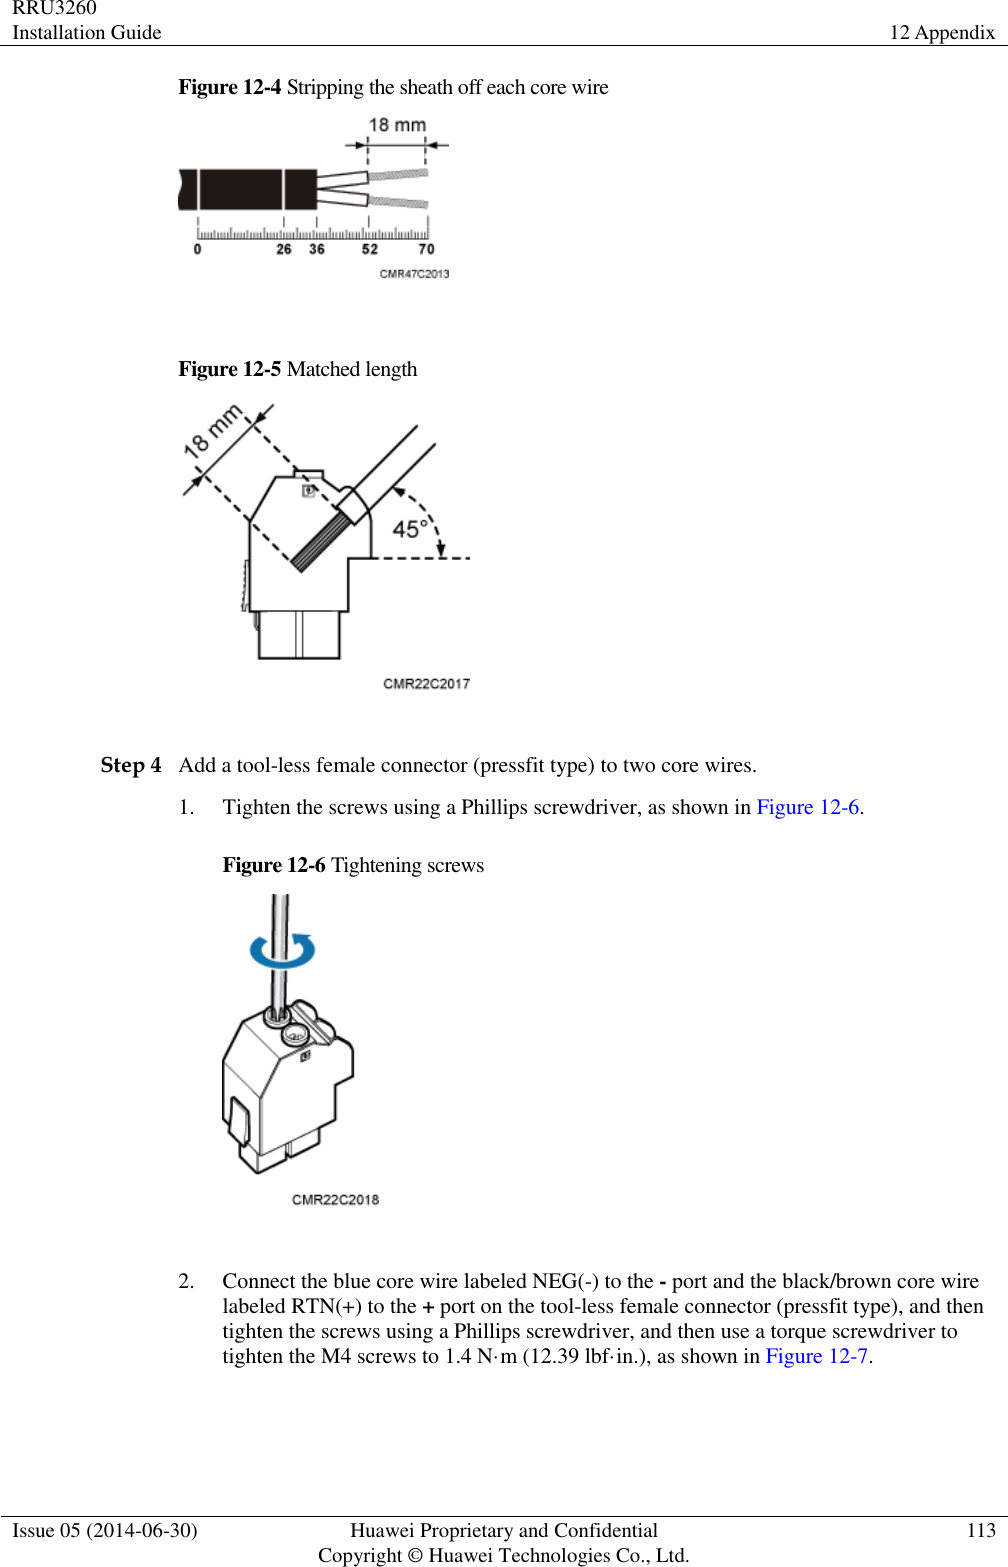 RRU3260 Installation Guide 12 Appendix  Issue 05 (2014-06-30) Huawei Proprietary and Confidential                                     Copyright © Huawei Technologies Co., Ltd. 113  Figure 12-4 Stripping the sheath off each core wire   Figure 12-5 Matched length   Step 4 Add a tool-less female connector (pressfit type) to two core wires. 1. Tighten the screws using a Phillips screwdriver, as shown in Figure 12-6. Figure 12-6 Tightening screws   2. Connect the blue core wire labeled NEG(-) to the - port and the black/brown core wire labeled RTN(+) to the + port on the tool-less female connector (pressfit type), and then tighten the screws using a Phillips screwdriver, and then use a torque screwdriver to tighten the M4 screws to 1.4 N·m (12.39 lbf·in.), as shown in Figure 12-7. 